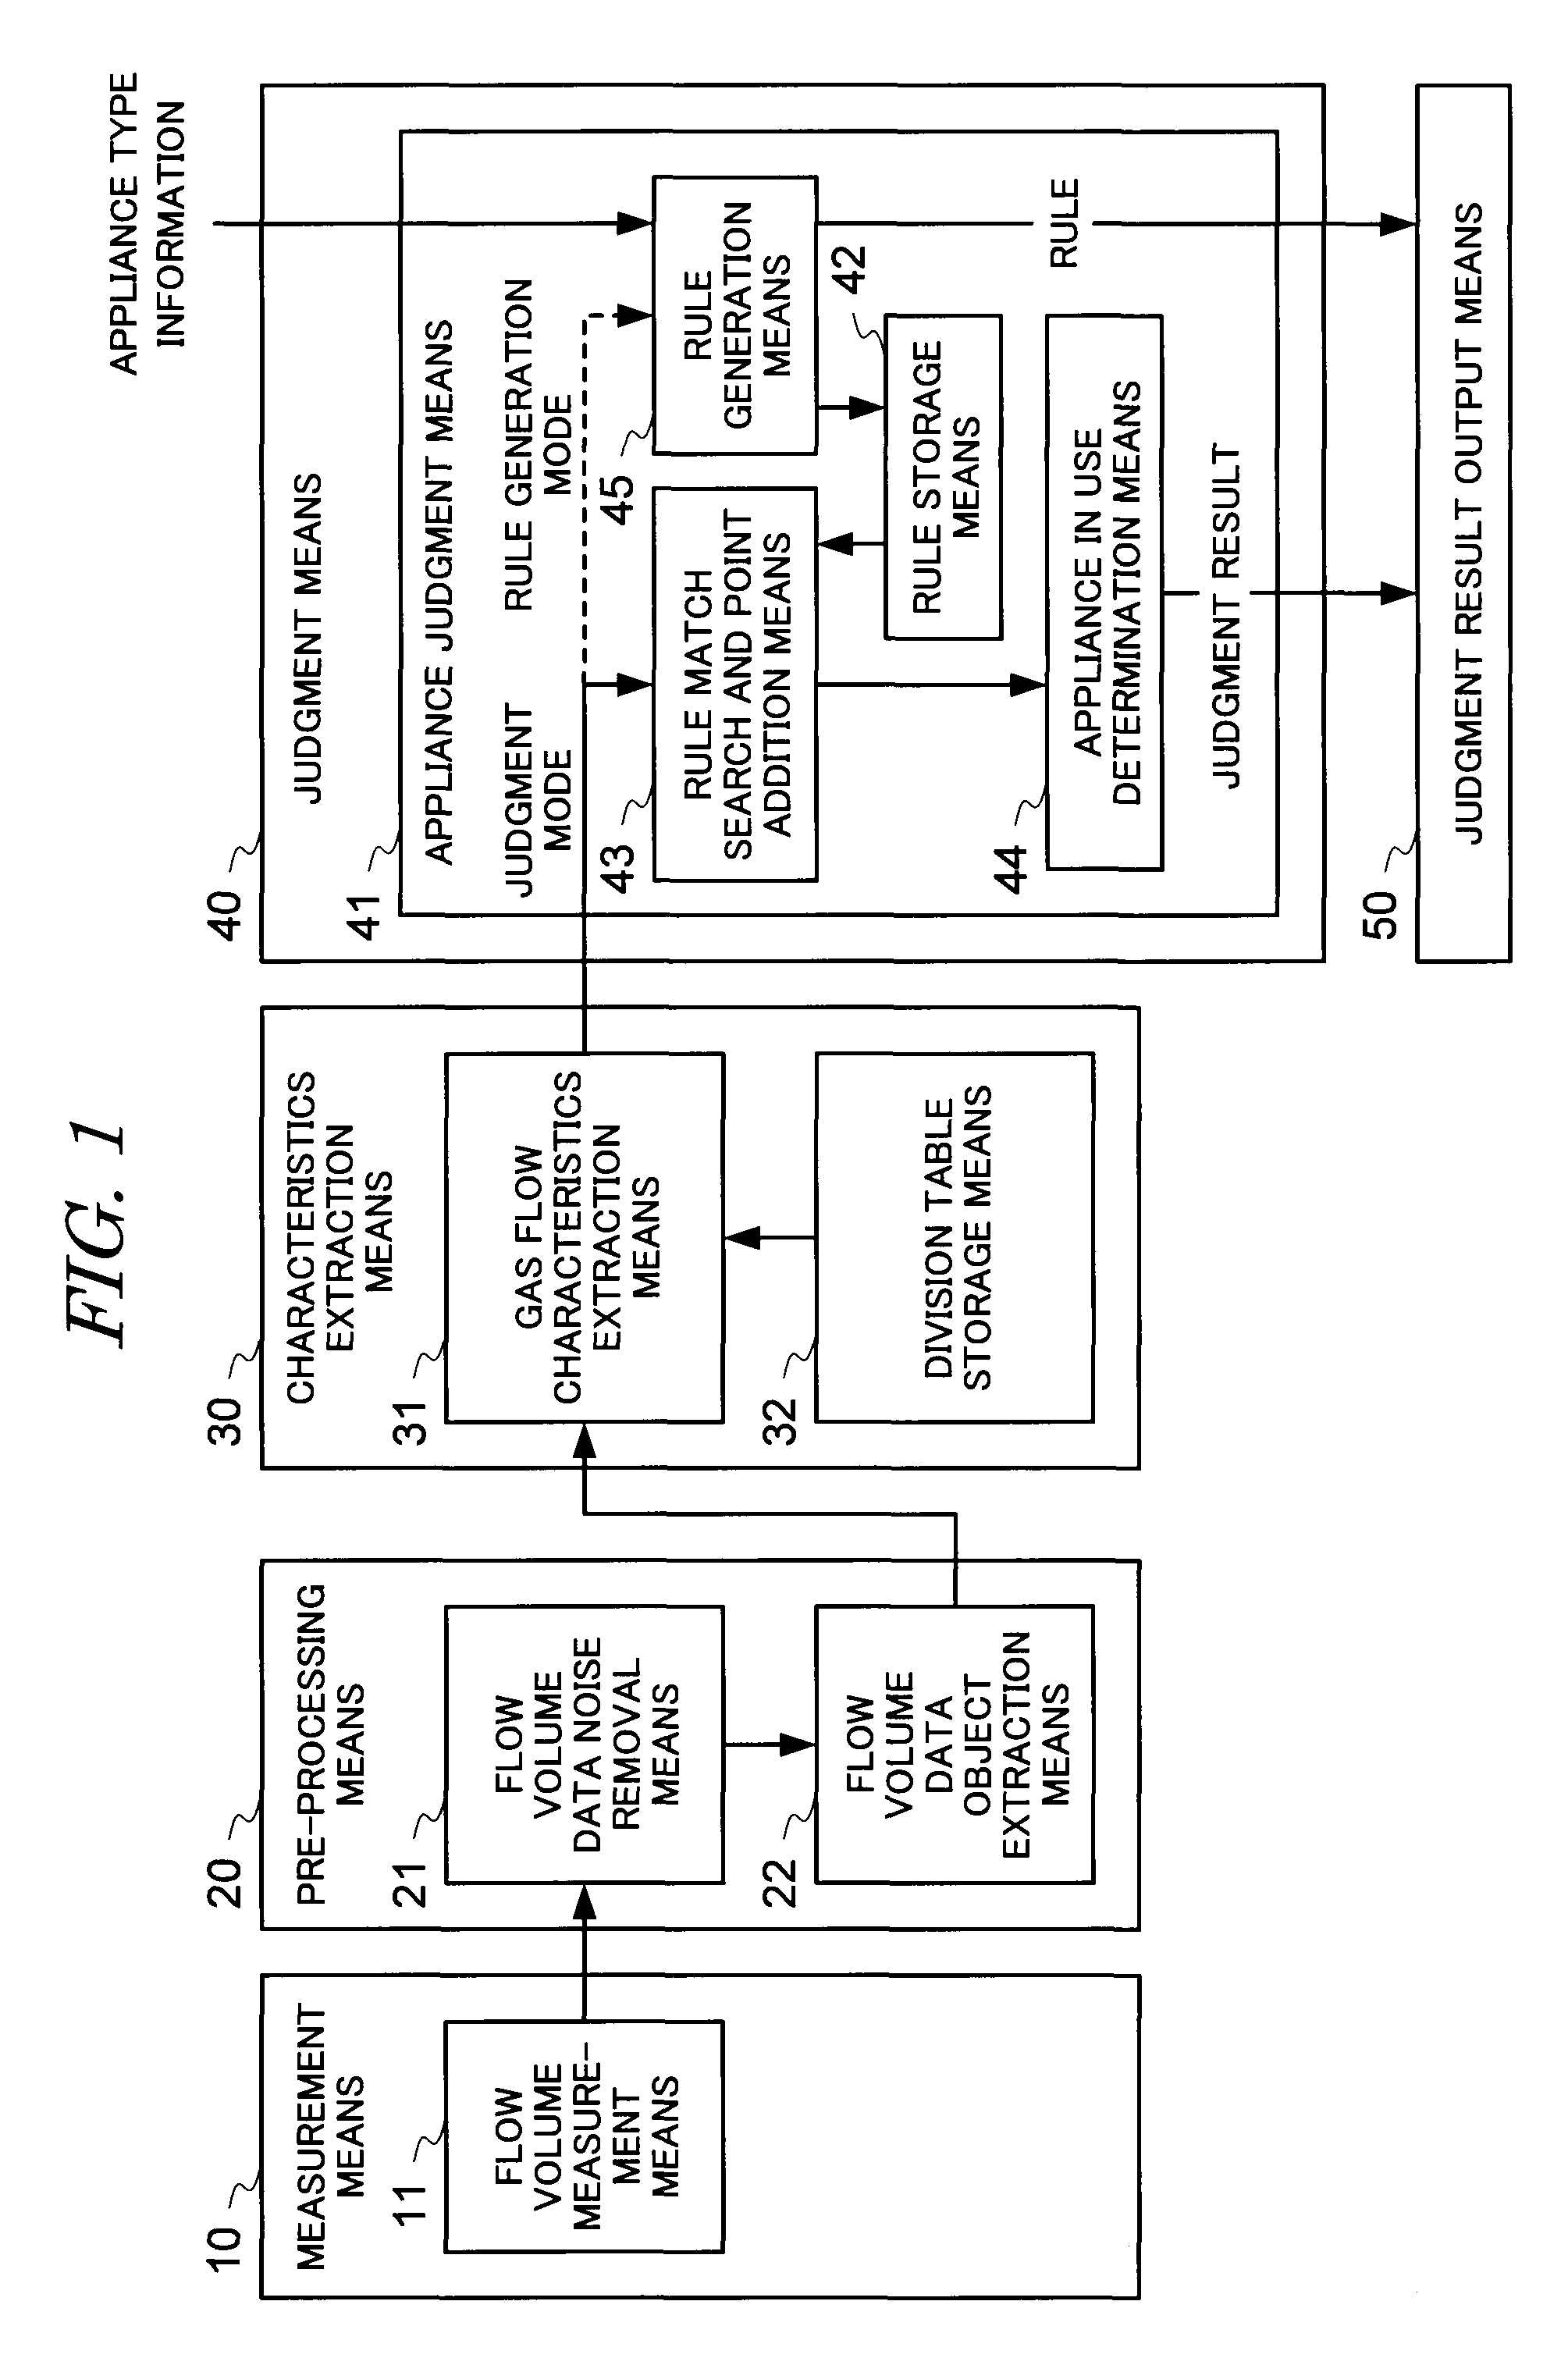 Gas appliance judgment apparatus and method